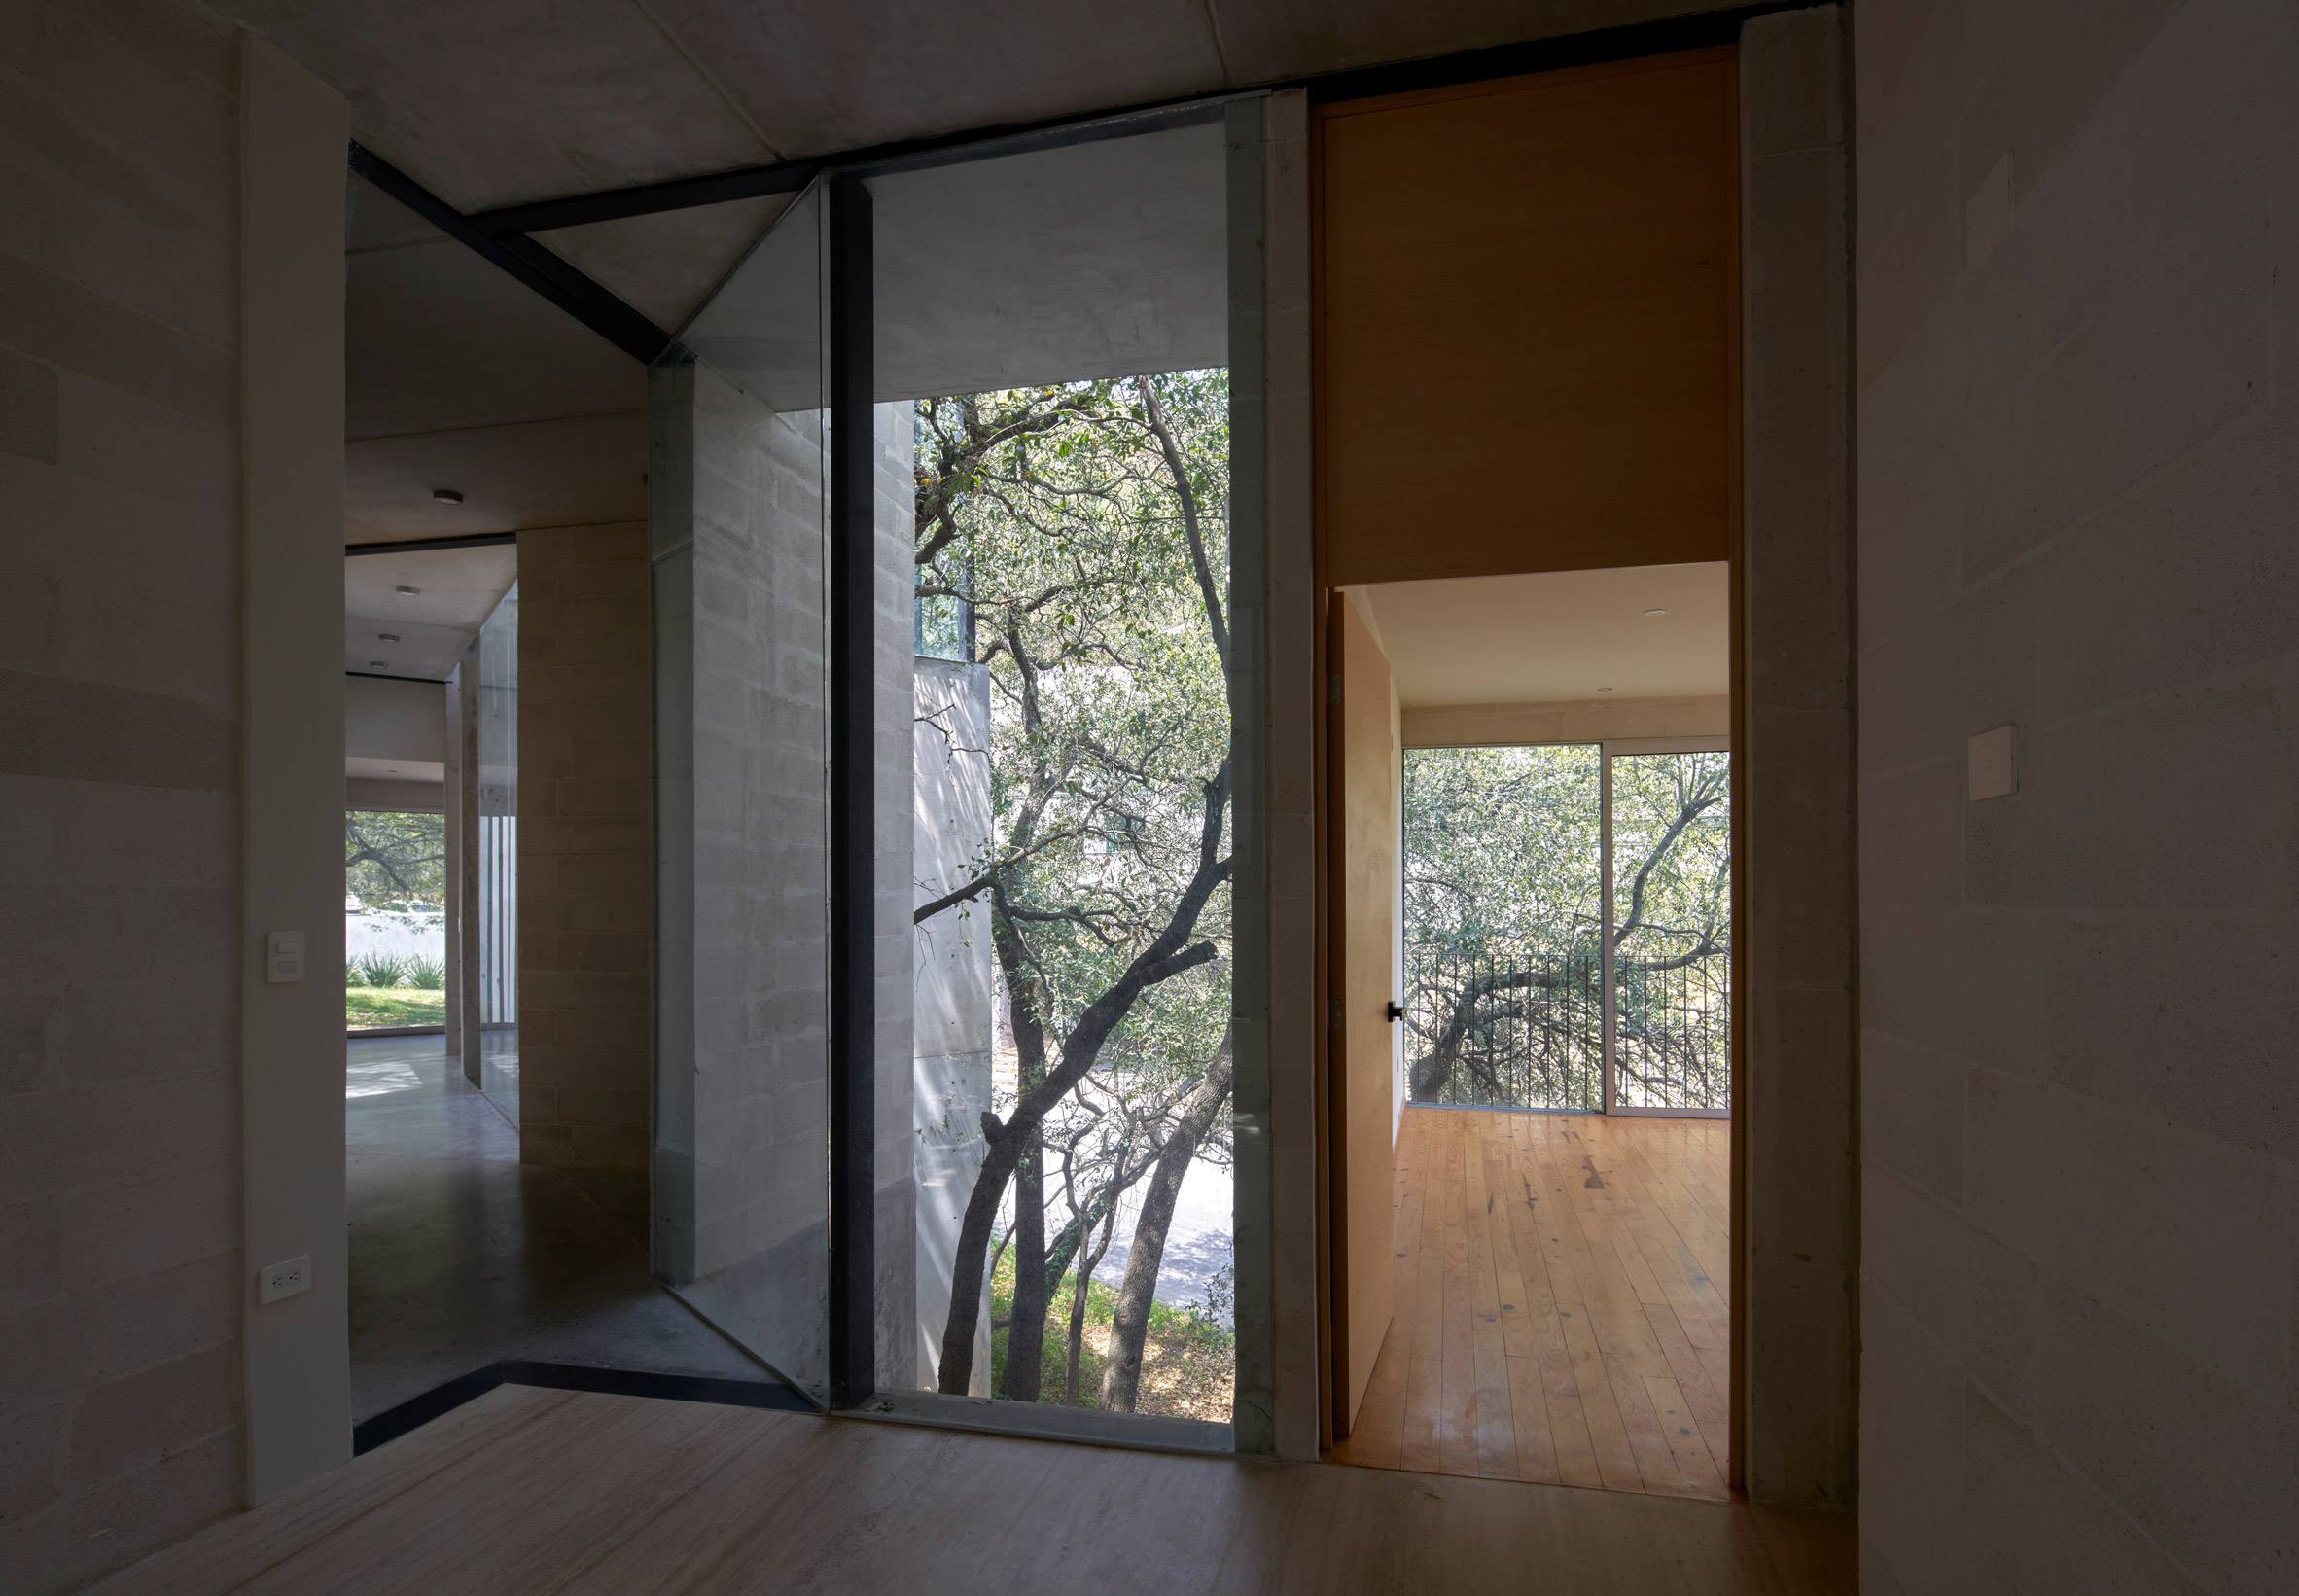 A corridor in a house overlooking a tree